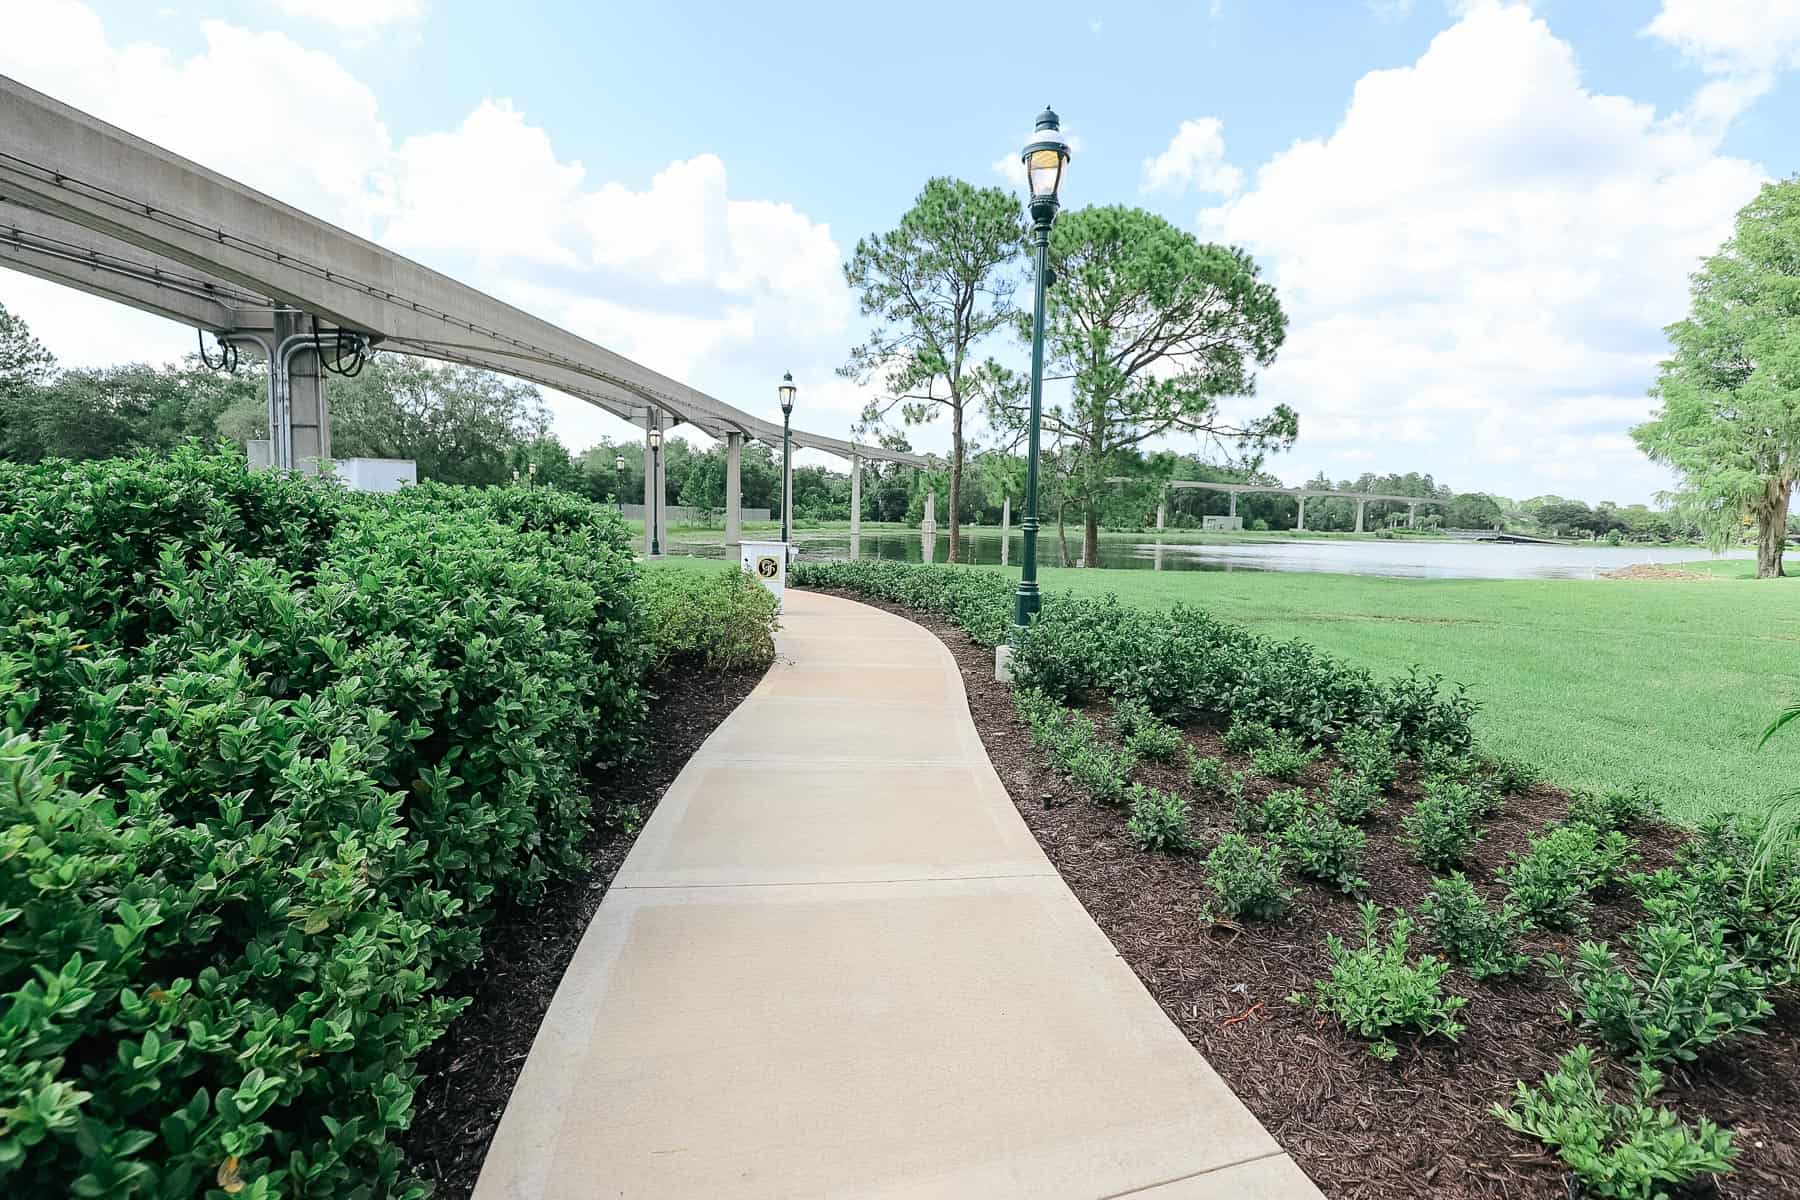 the walking path with shrubbery around it and monorail track 